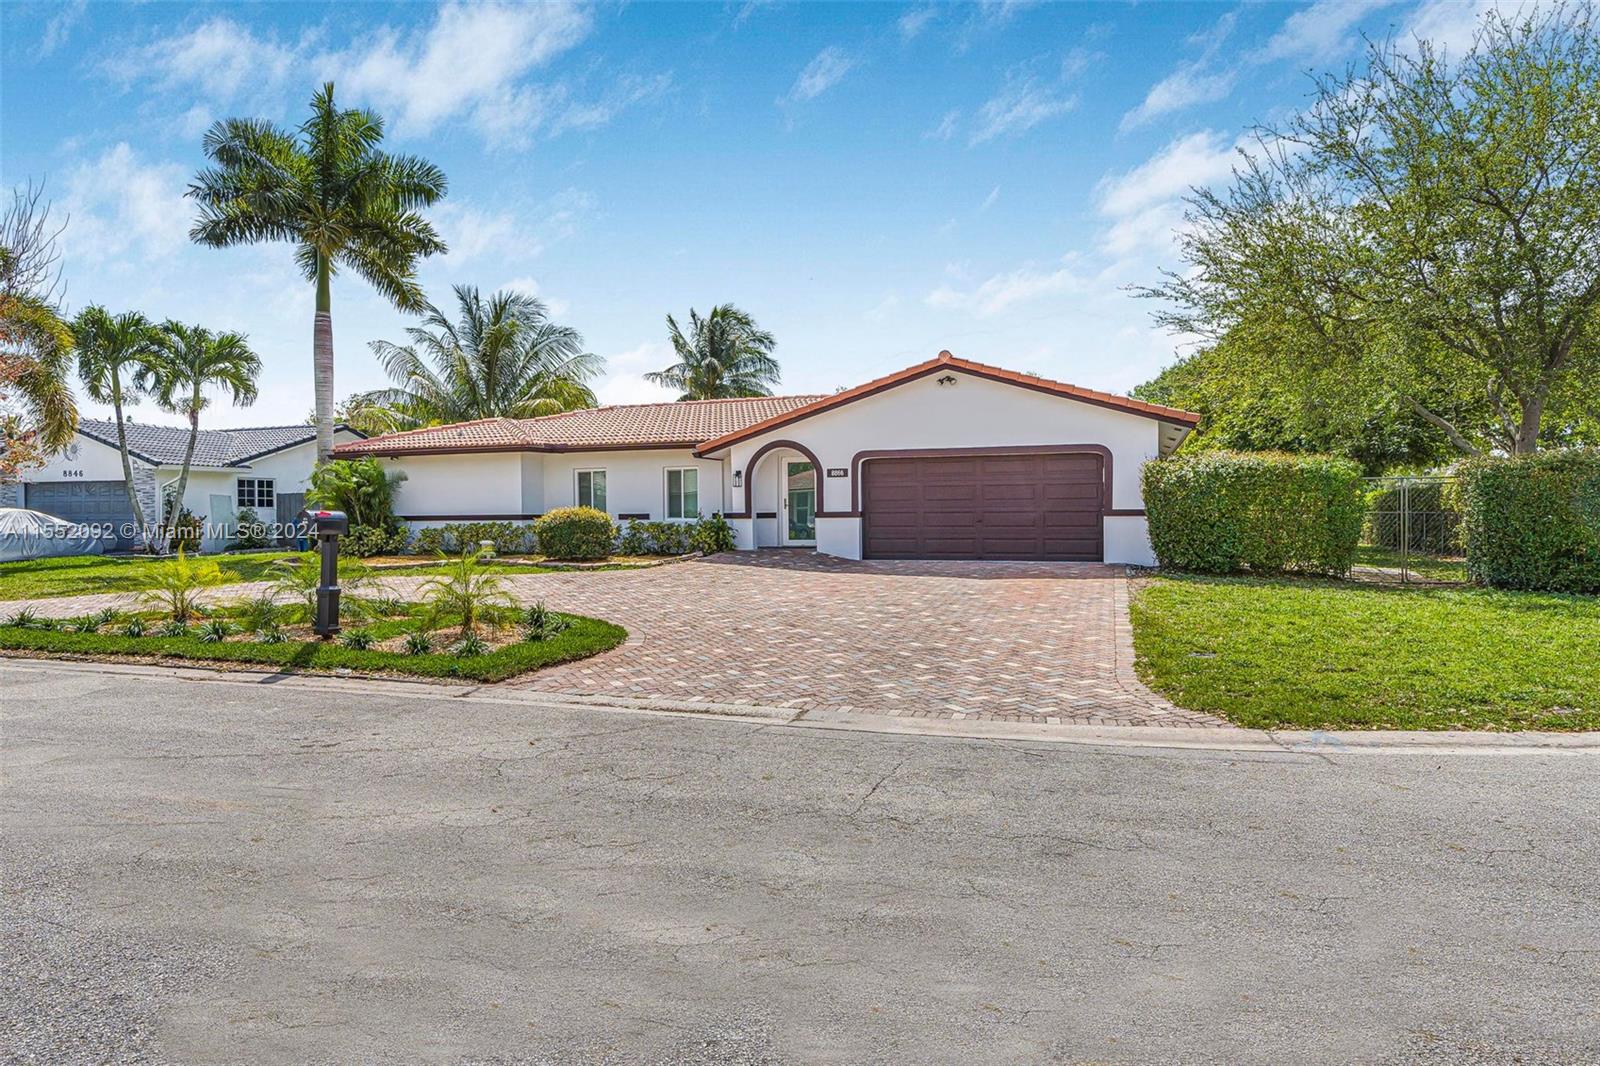 Property for Sale at Address Not Disclosed, Coral Springs, Broward County, Florida - Bedrooms: 5 
Bathrooms: 3  - $649,000